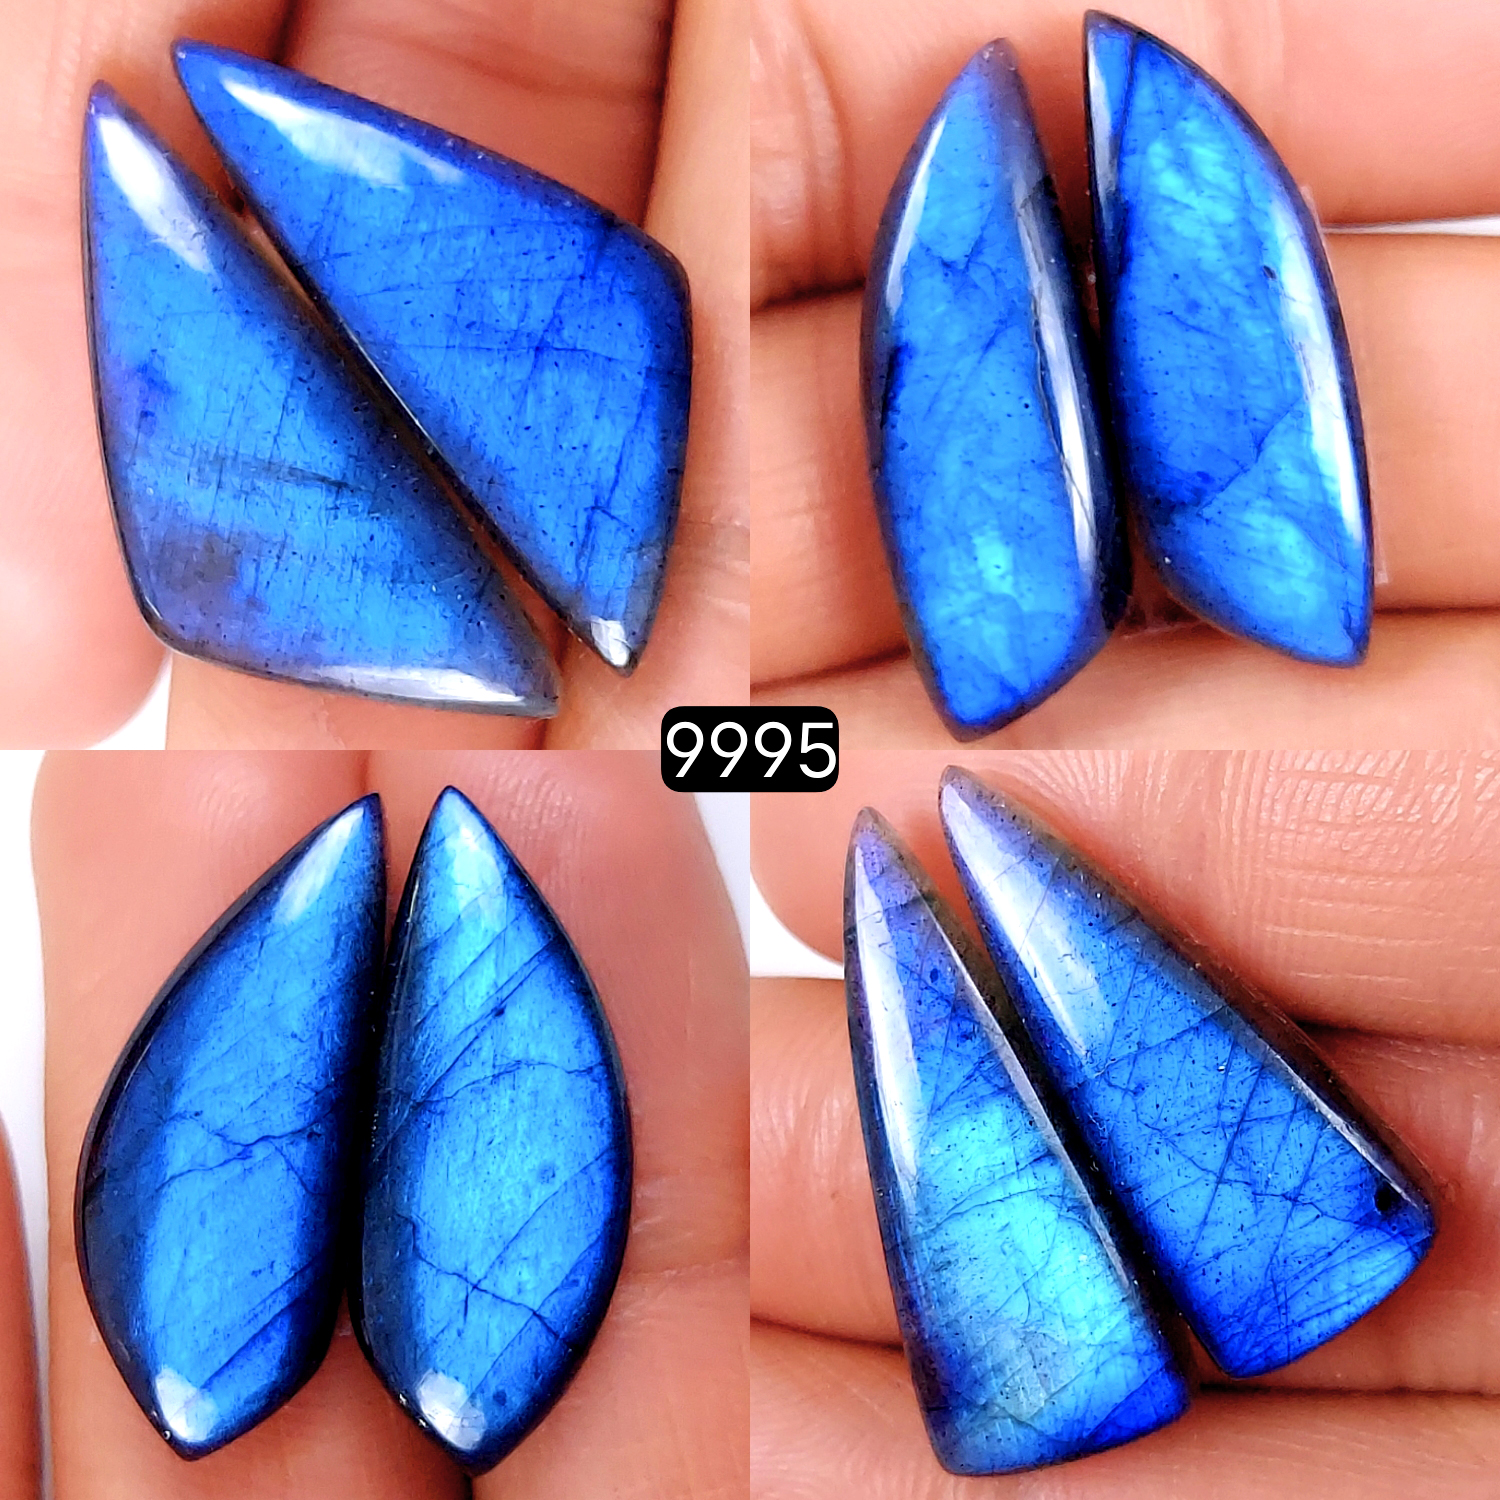 4Pair 121Cts Natural Labradorite Blue Fire Briolette Dangle Drop Earrings Semi Precious Crystal For Hoop Earrings Blue Gemstone Cabochon Matching pair 30x10 27x10mm #9995